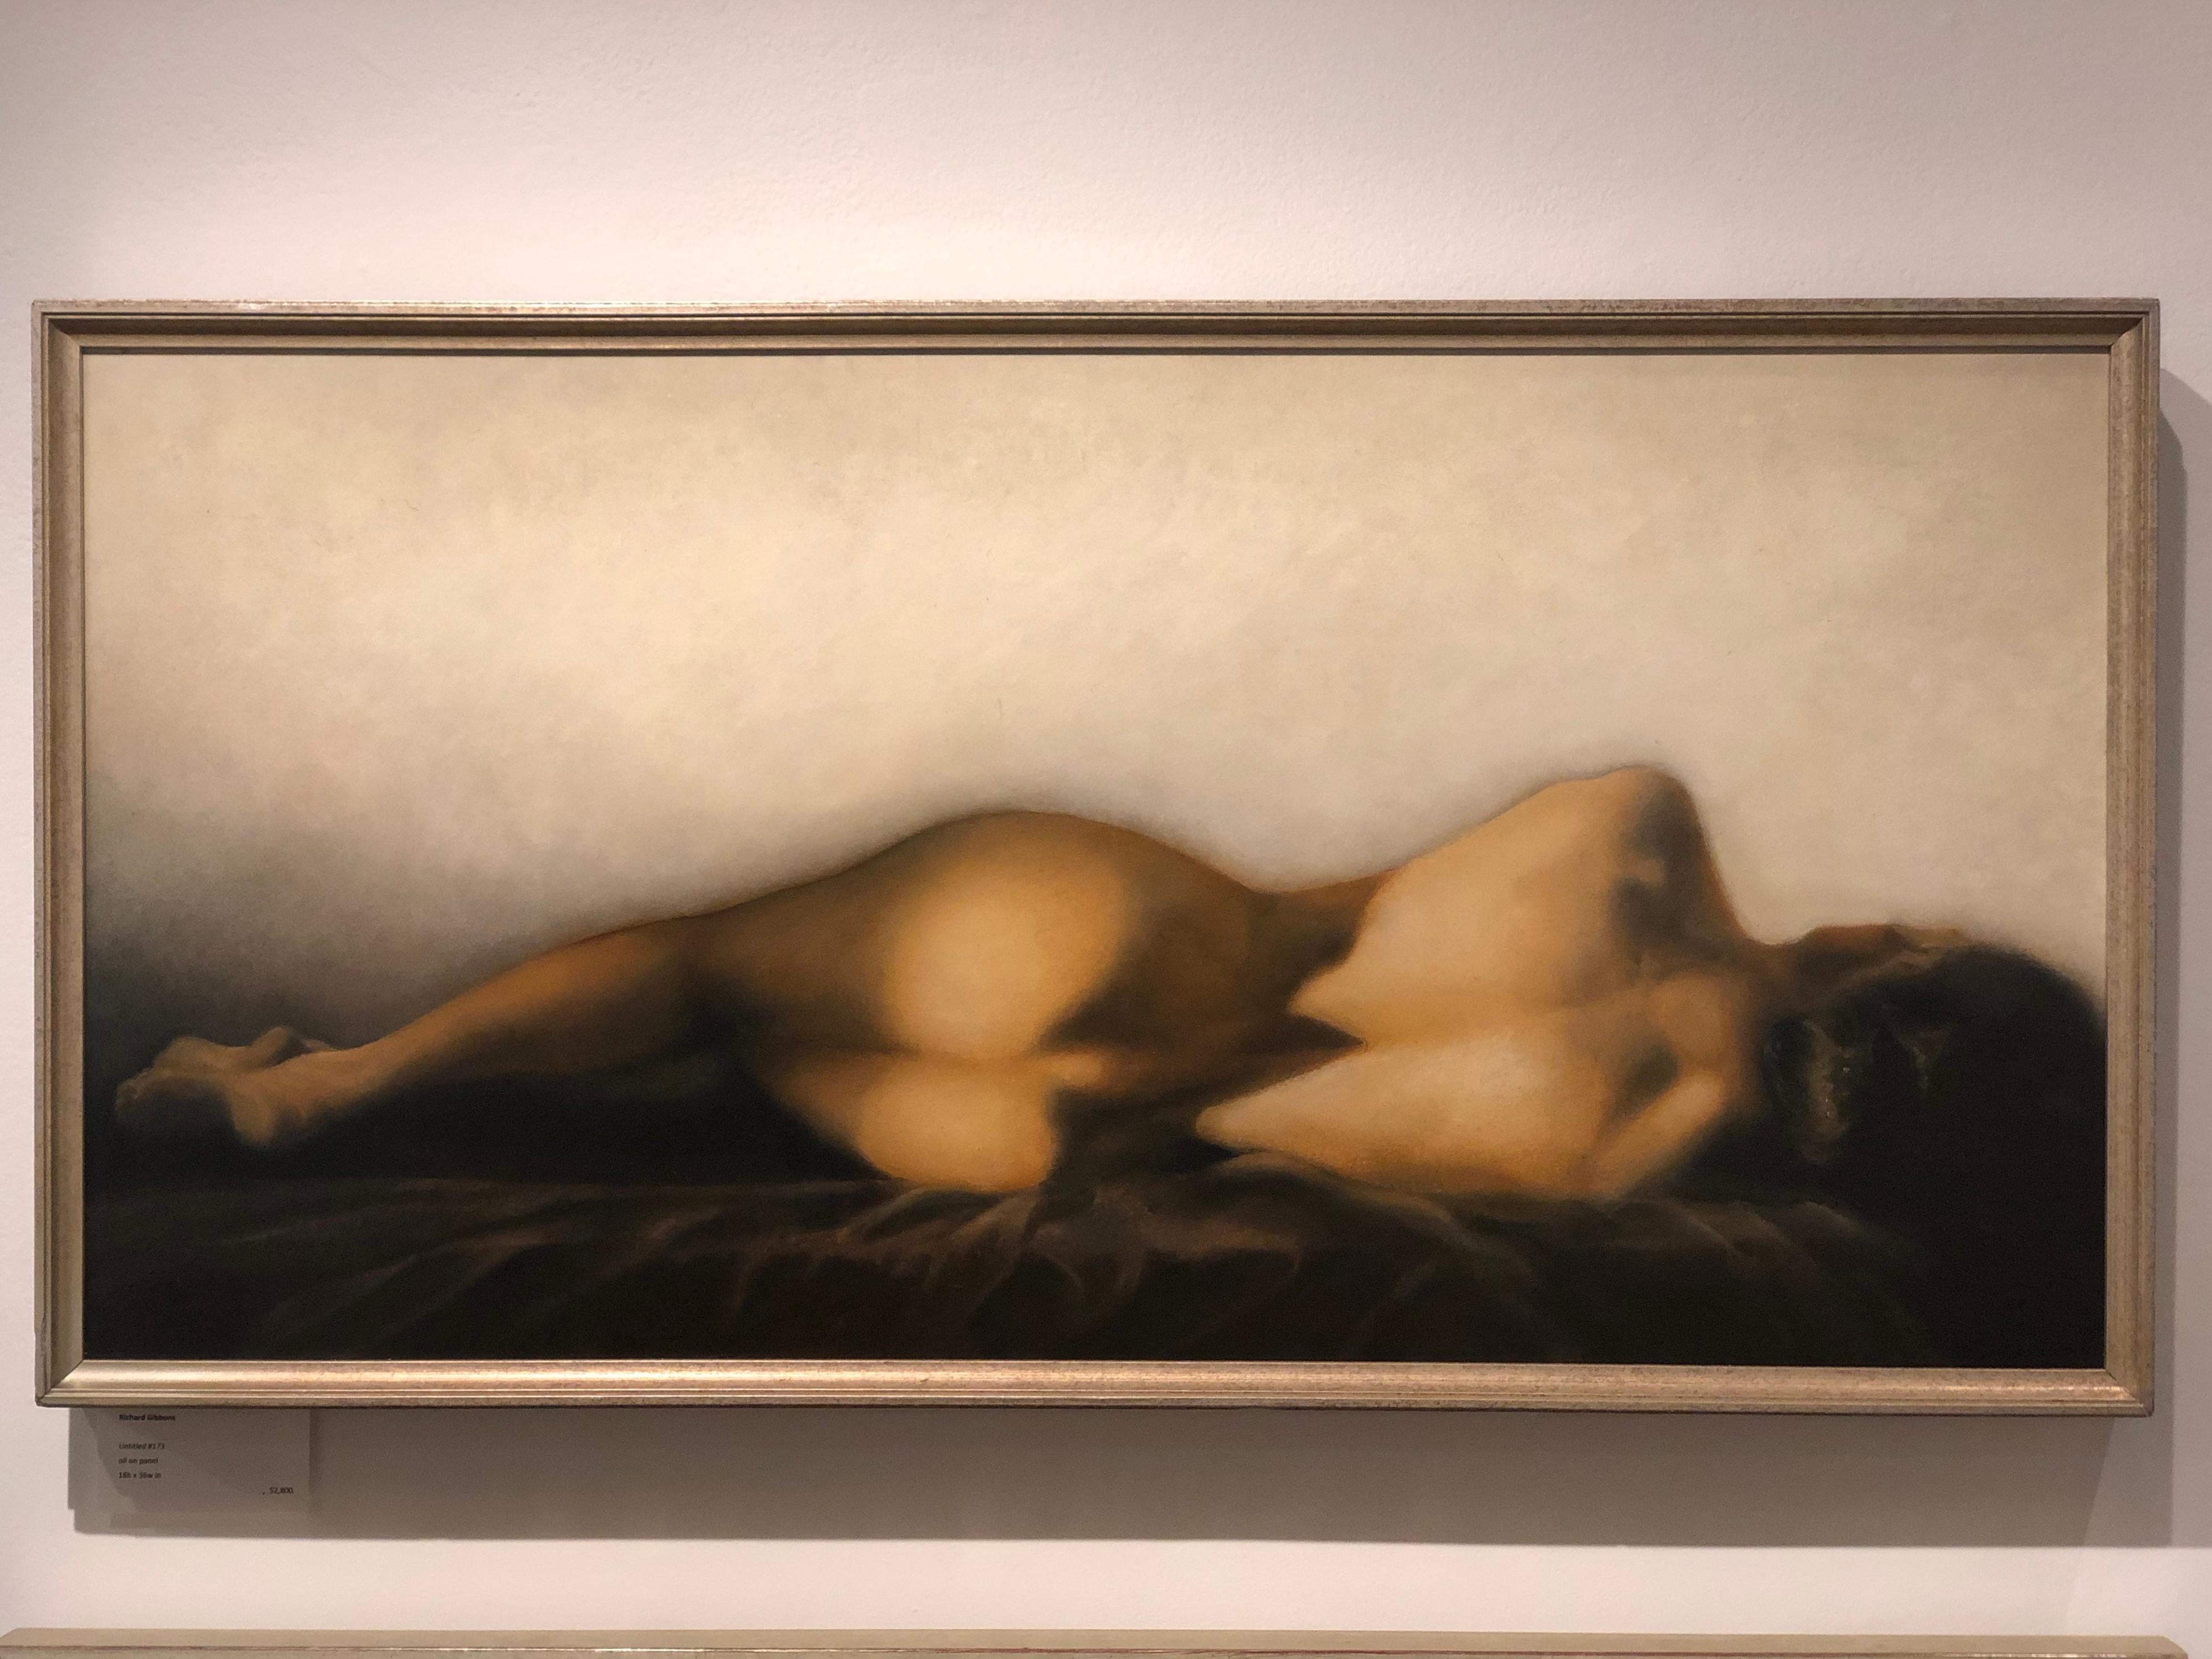 Untitled #173 - Nude Female Figure Lying Down,  Earthy Gold and Neutral Tones - Painting by Richard Gibbons